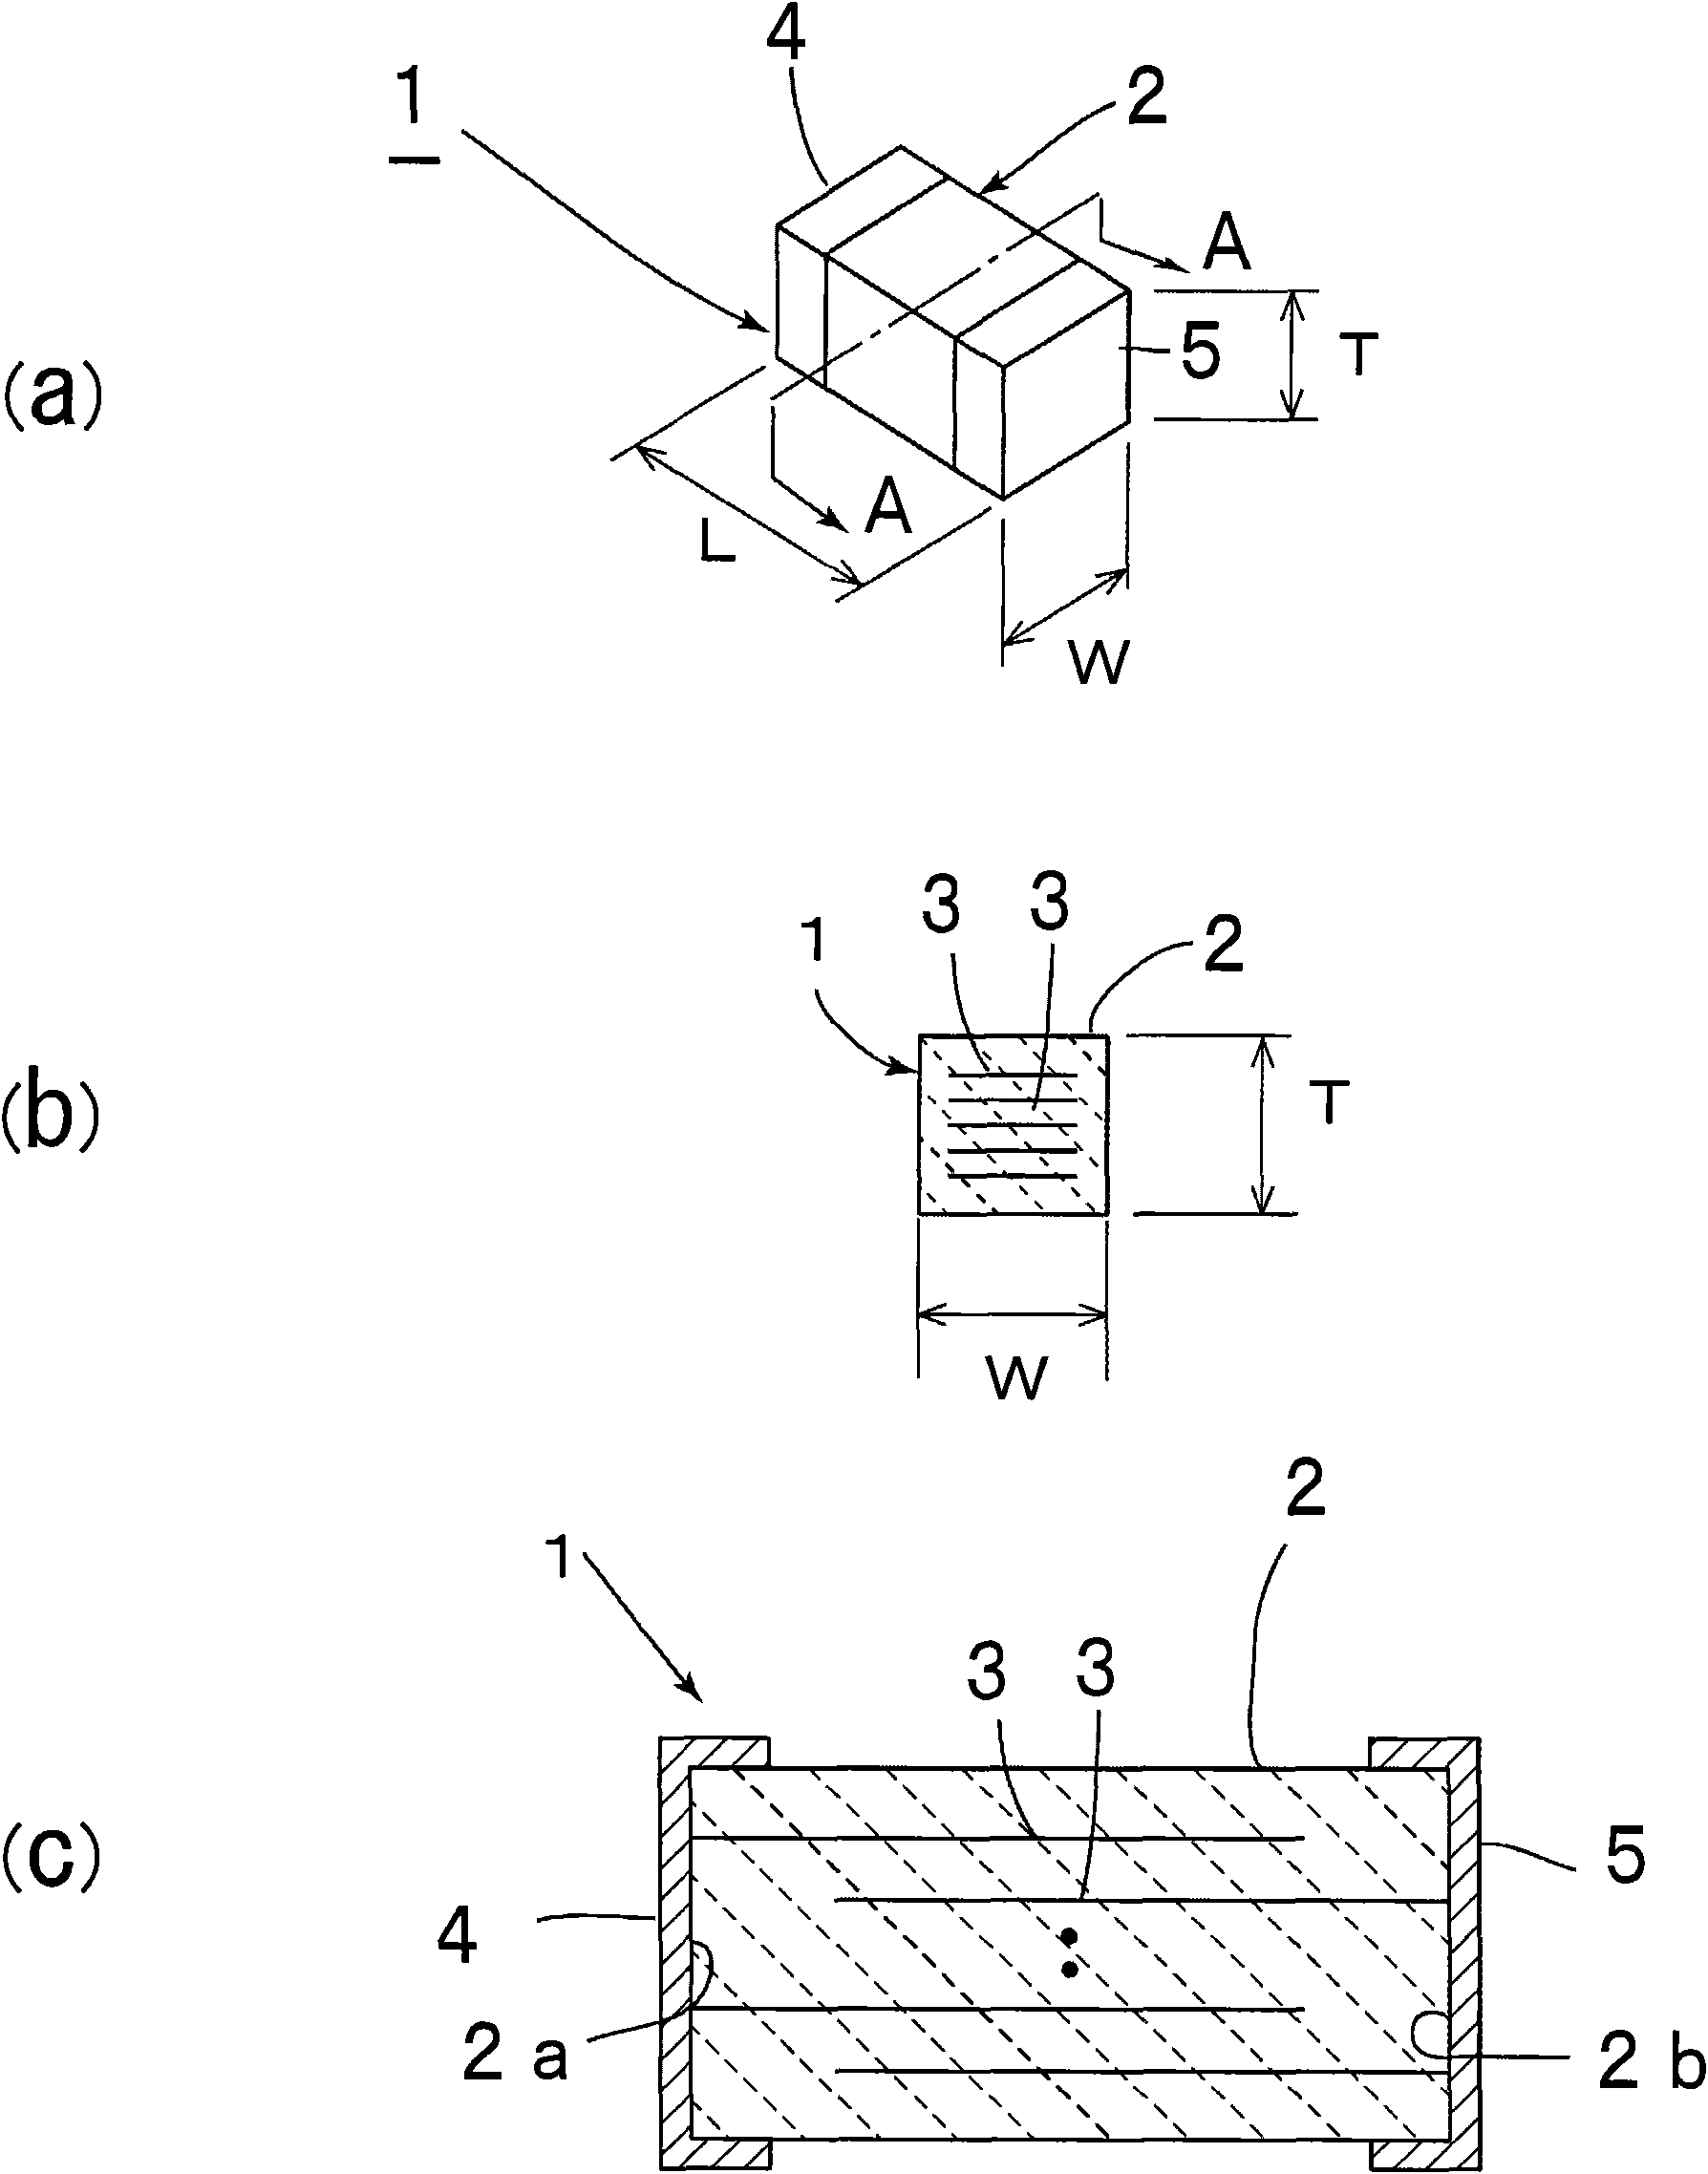 Electronic component transporting device